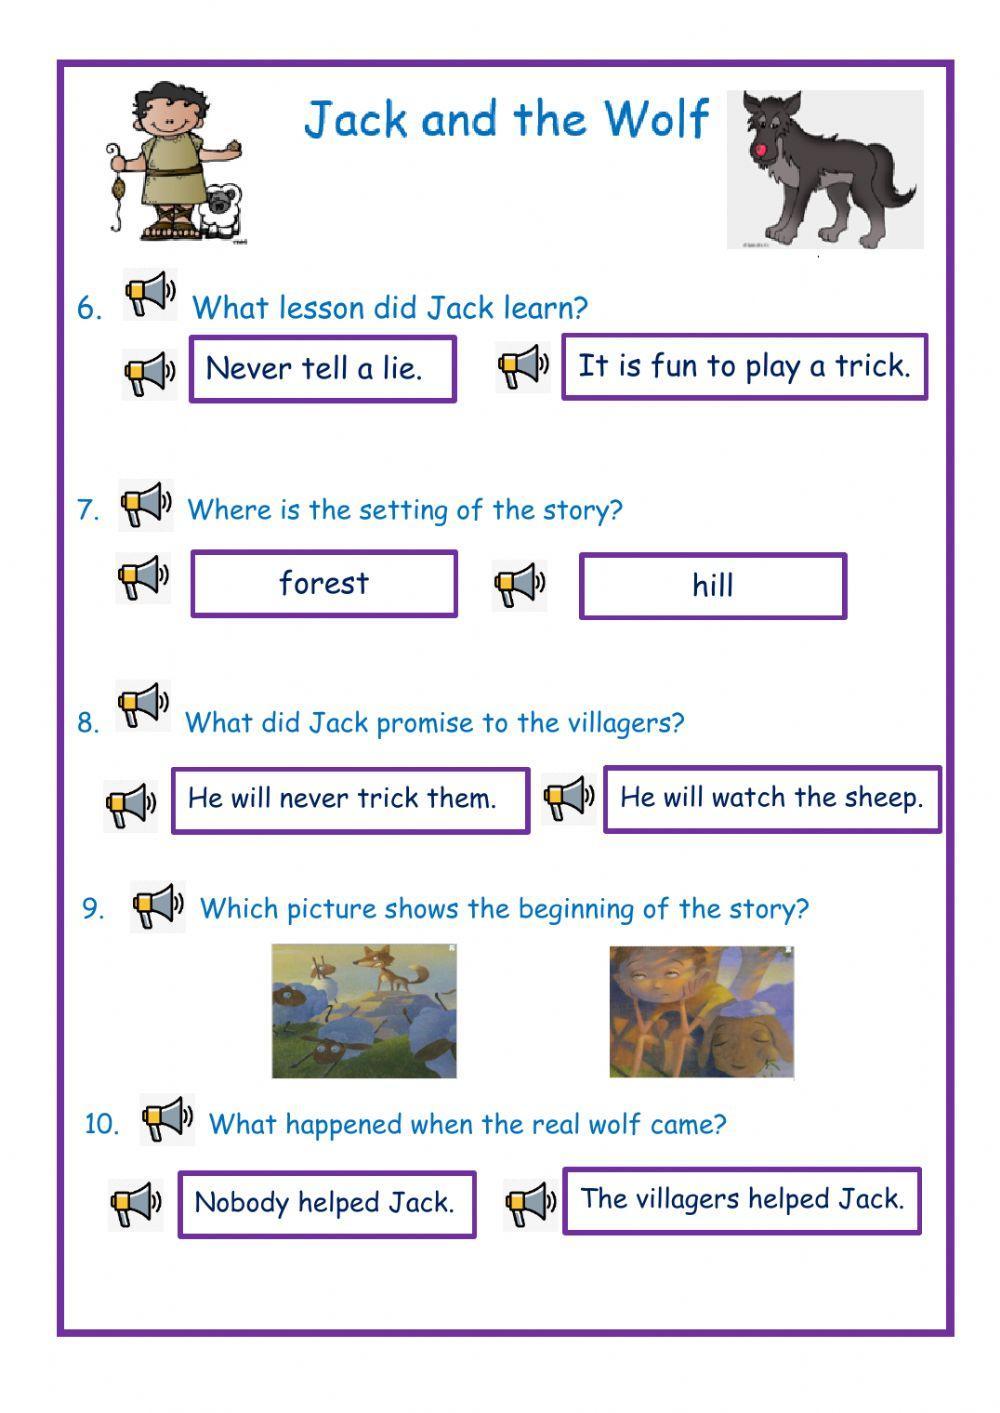 Jack and the Wolf Comprehension Guide